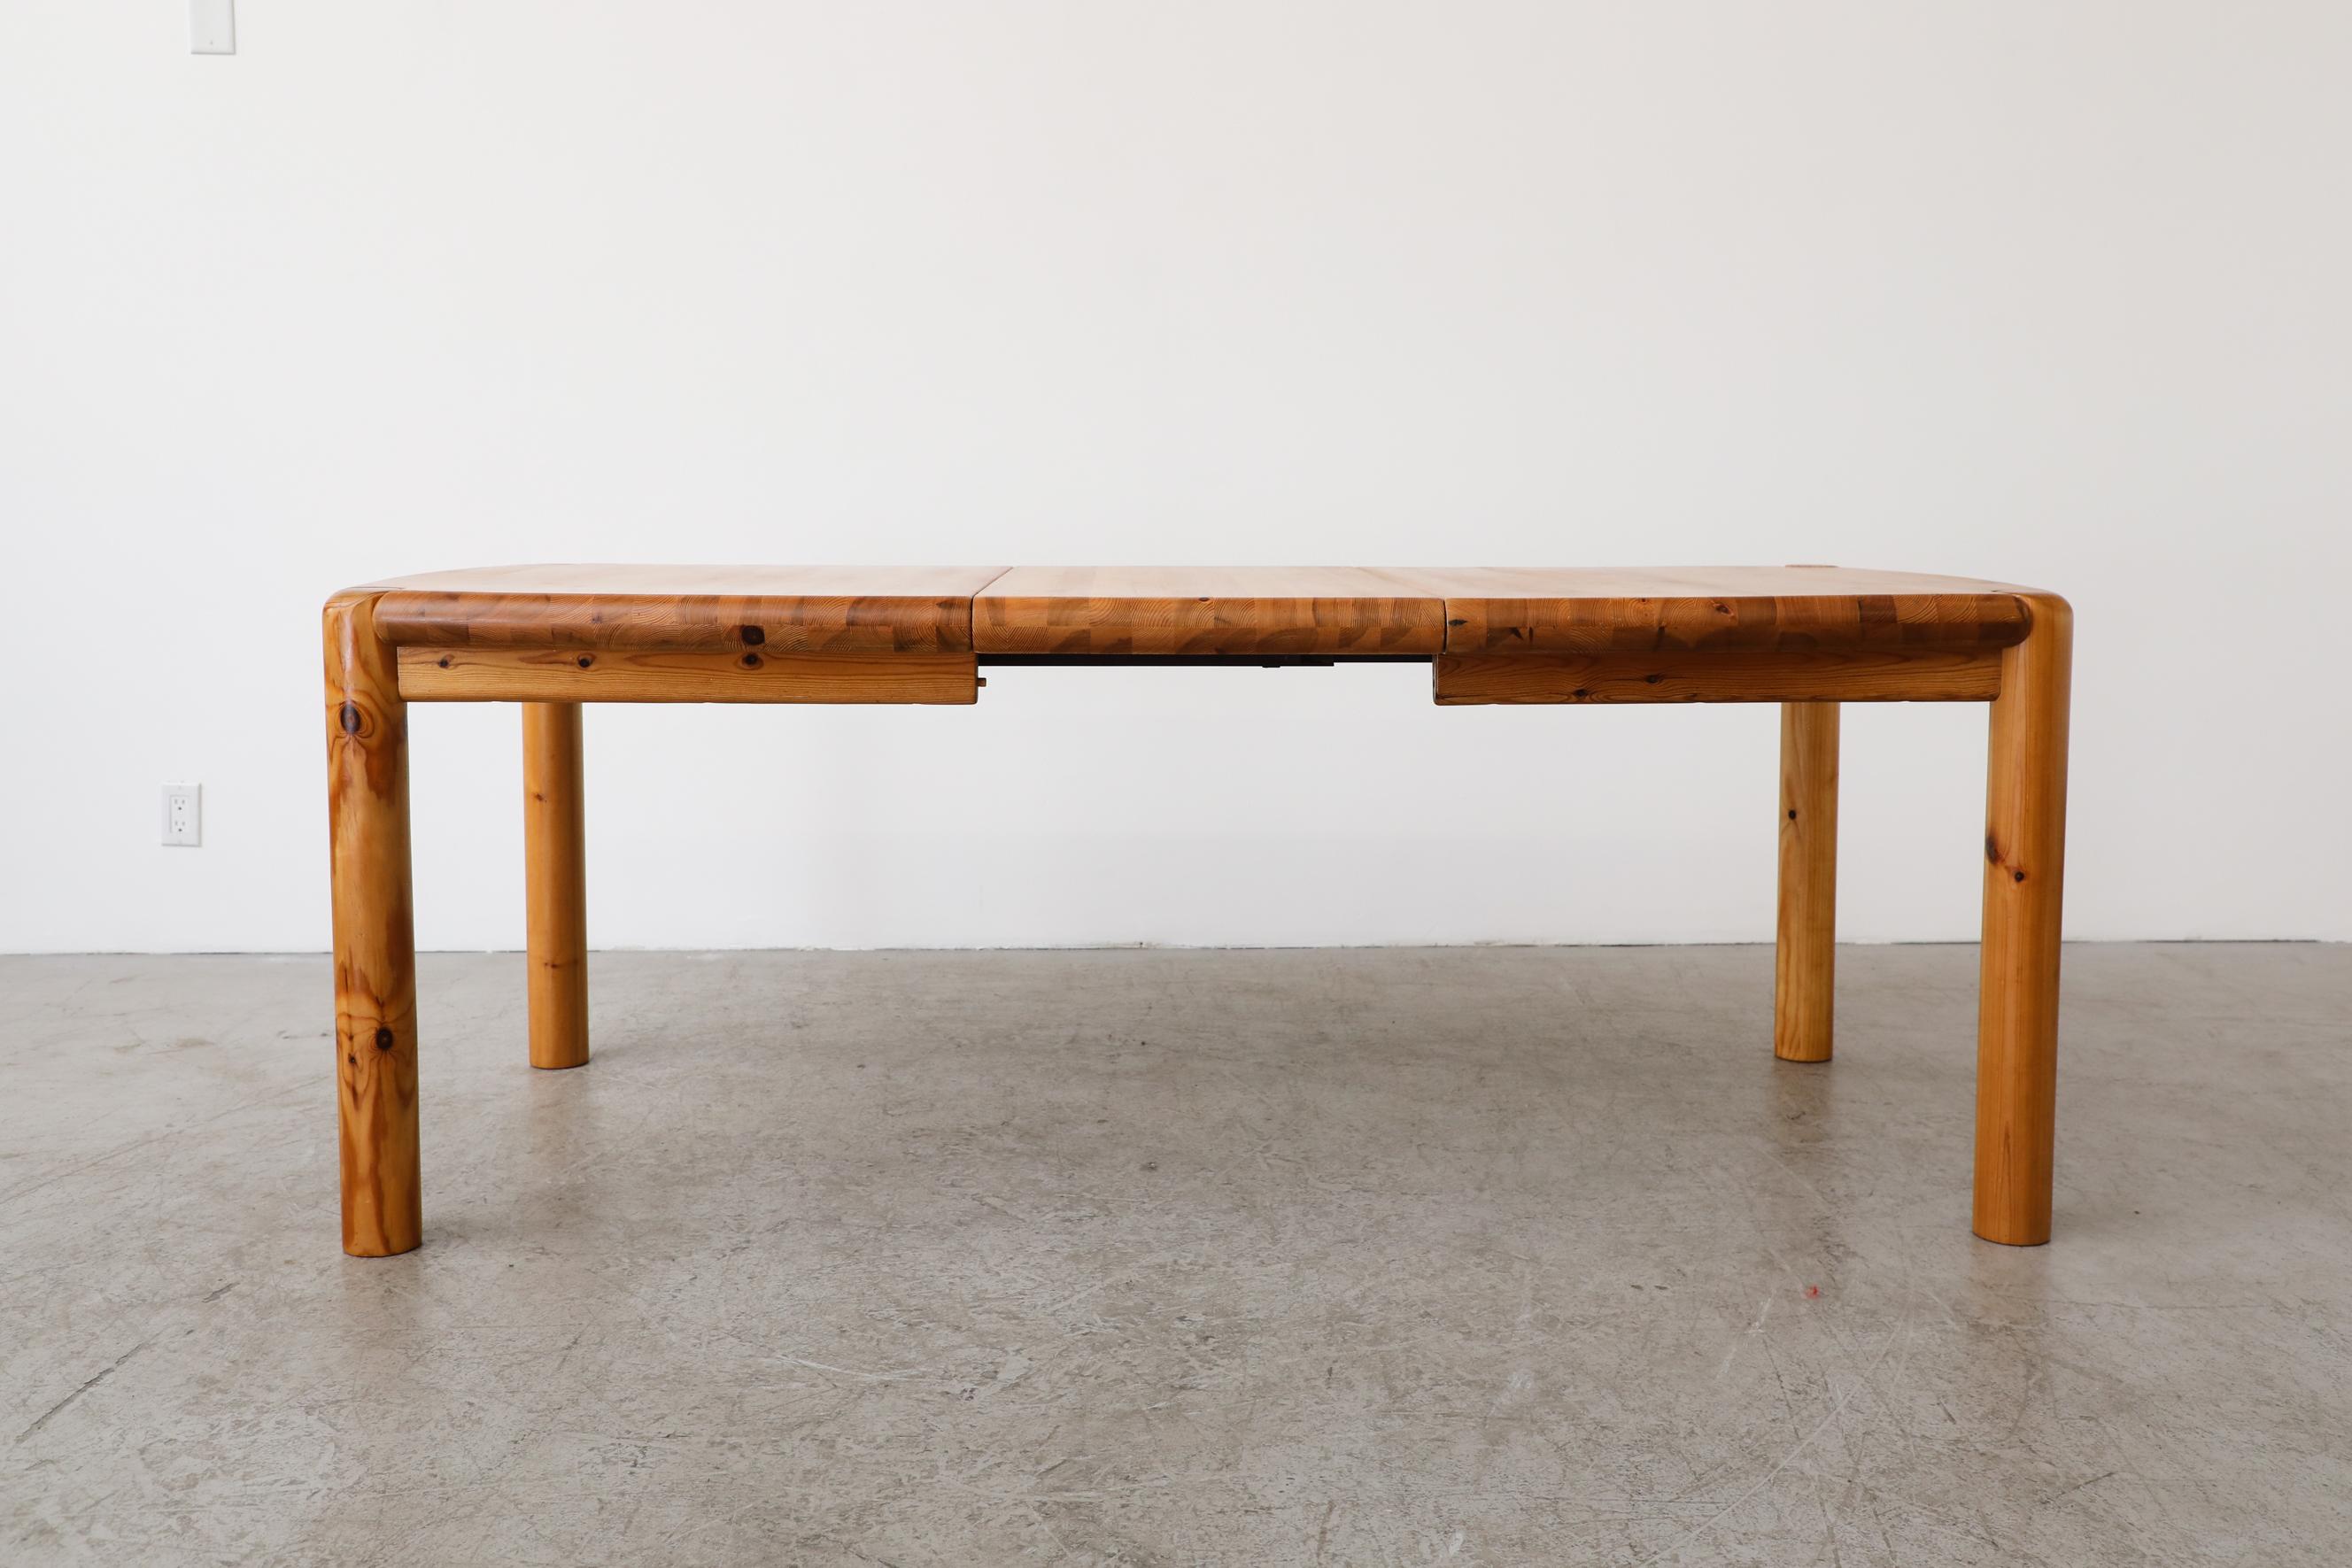 Pine dining table with a leaf by Rainer Daumiller for Hirtshals Savvaerk, Denmark. In original condition with a few light signs of wear, consistent with its age and use. Table measures 78.75